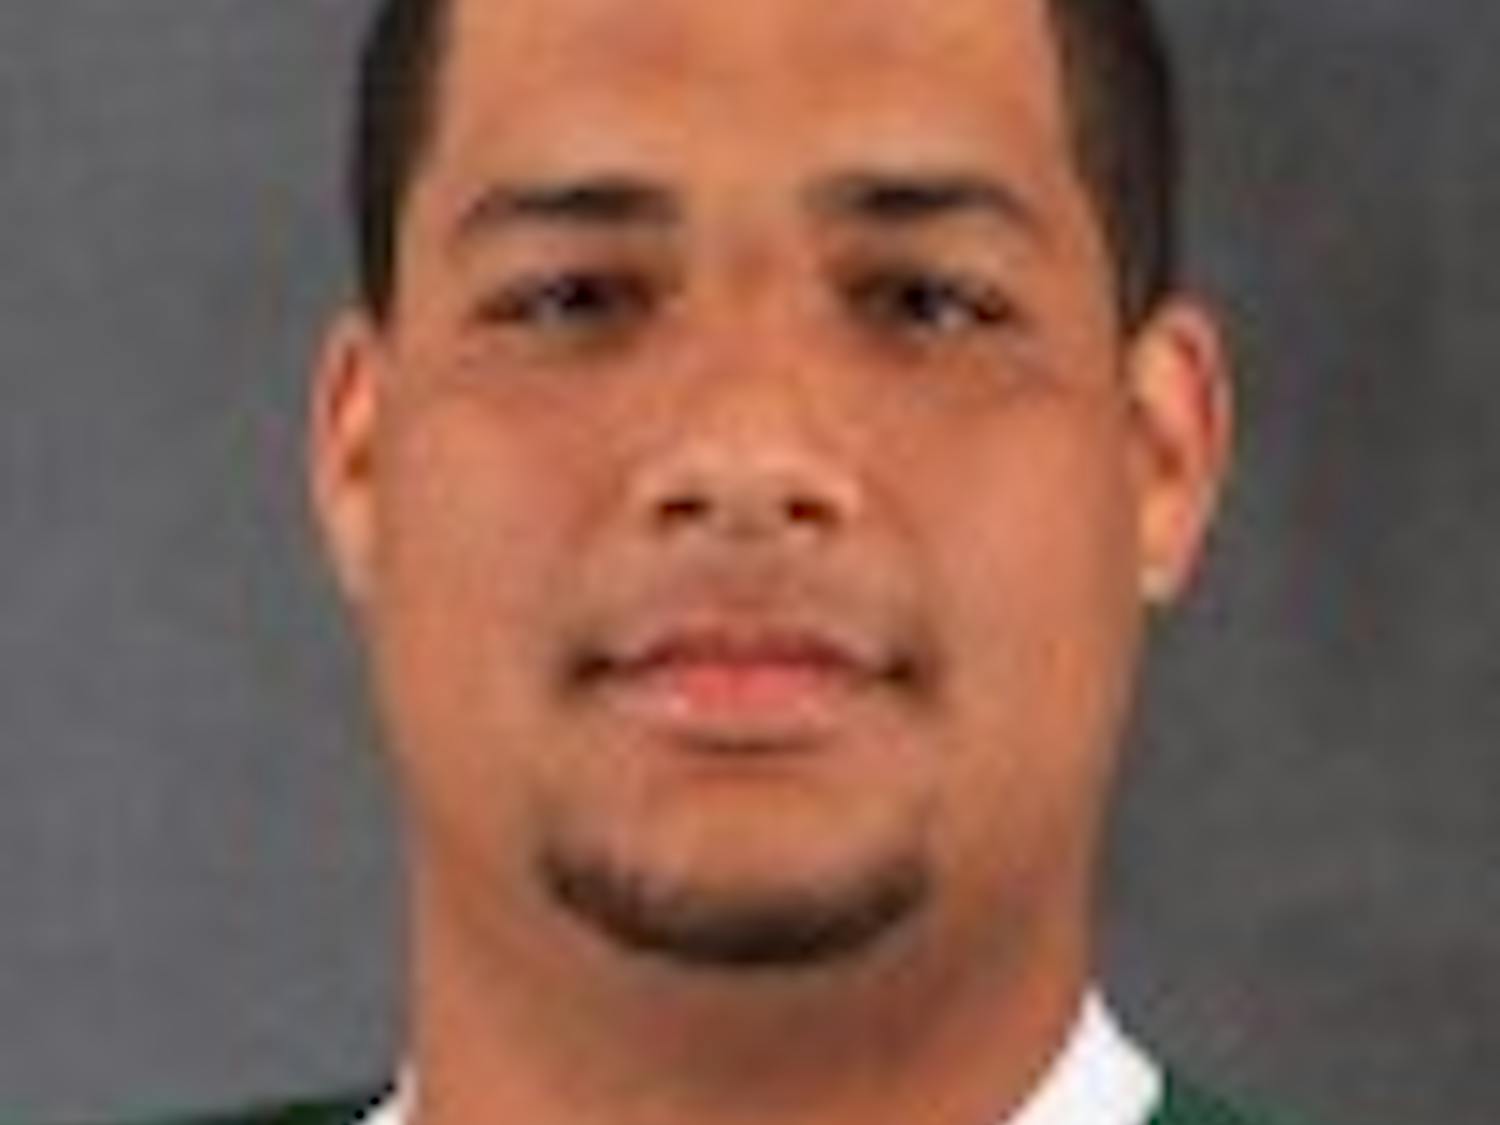 Ohio football player suspended after alleged assault  